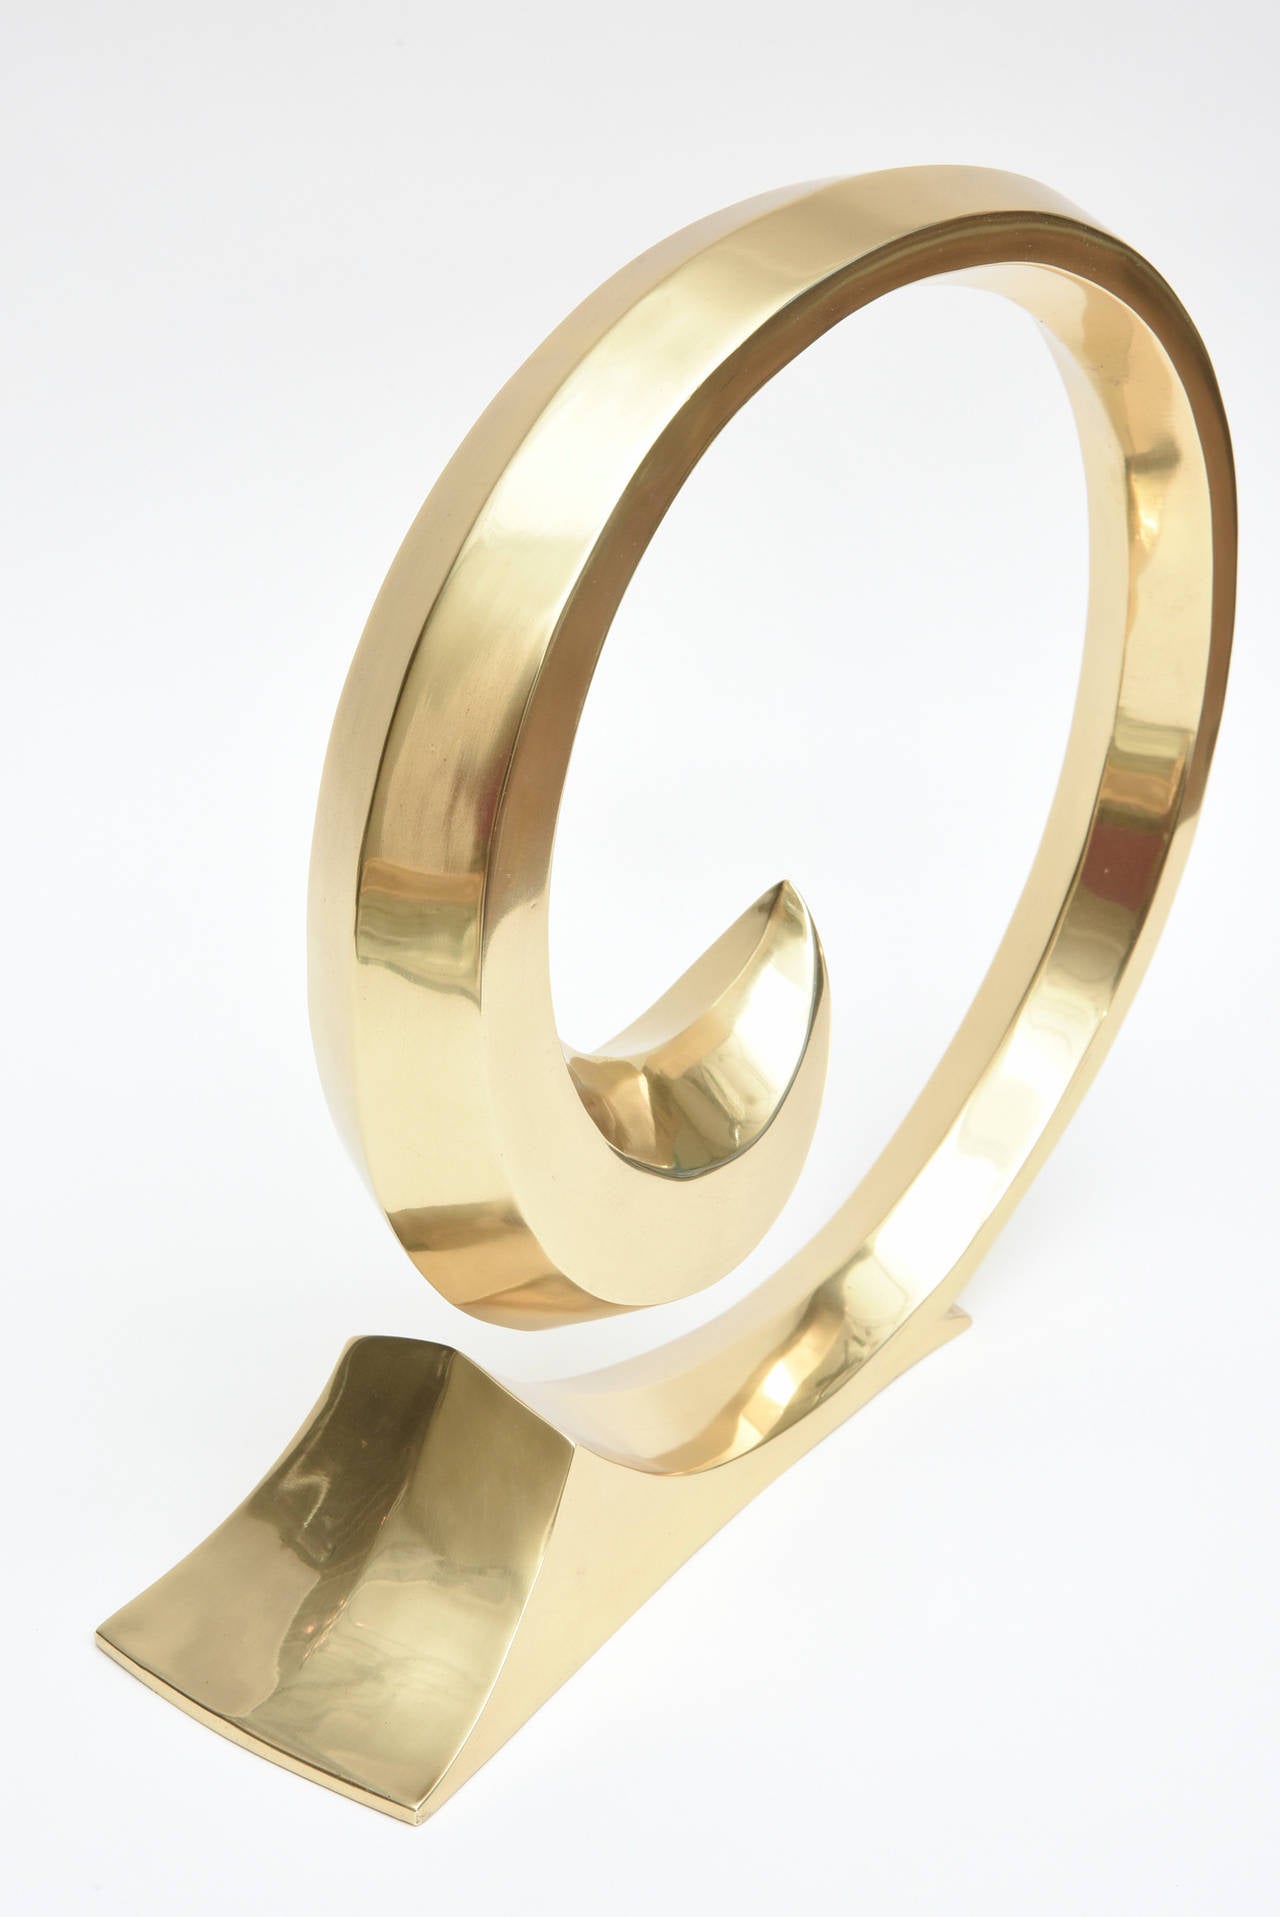 French Iconic Pierre Cardin Brass Tabletop Sculpture 